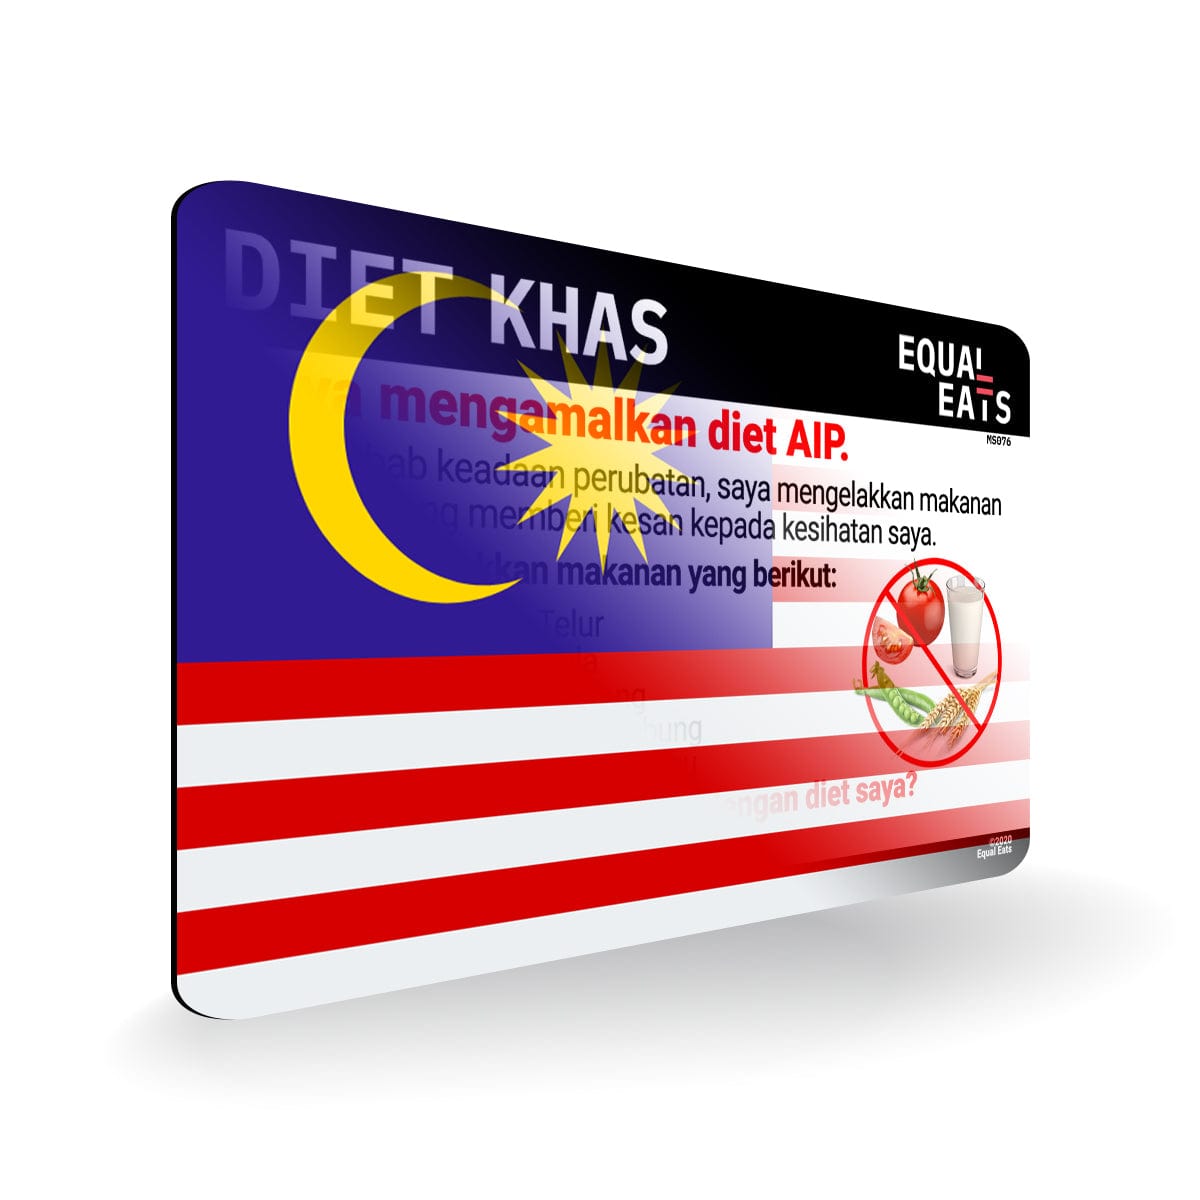 AIP Diet in Malay. AIP Diet Card for Malaysia